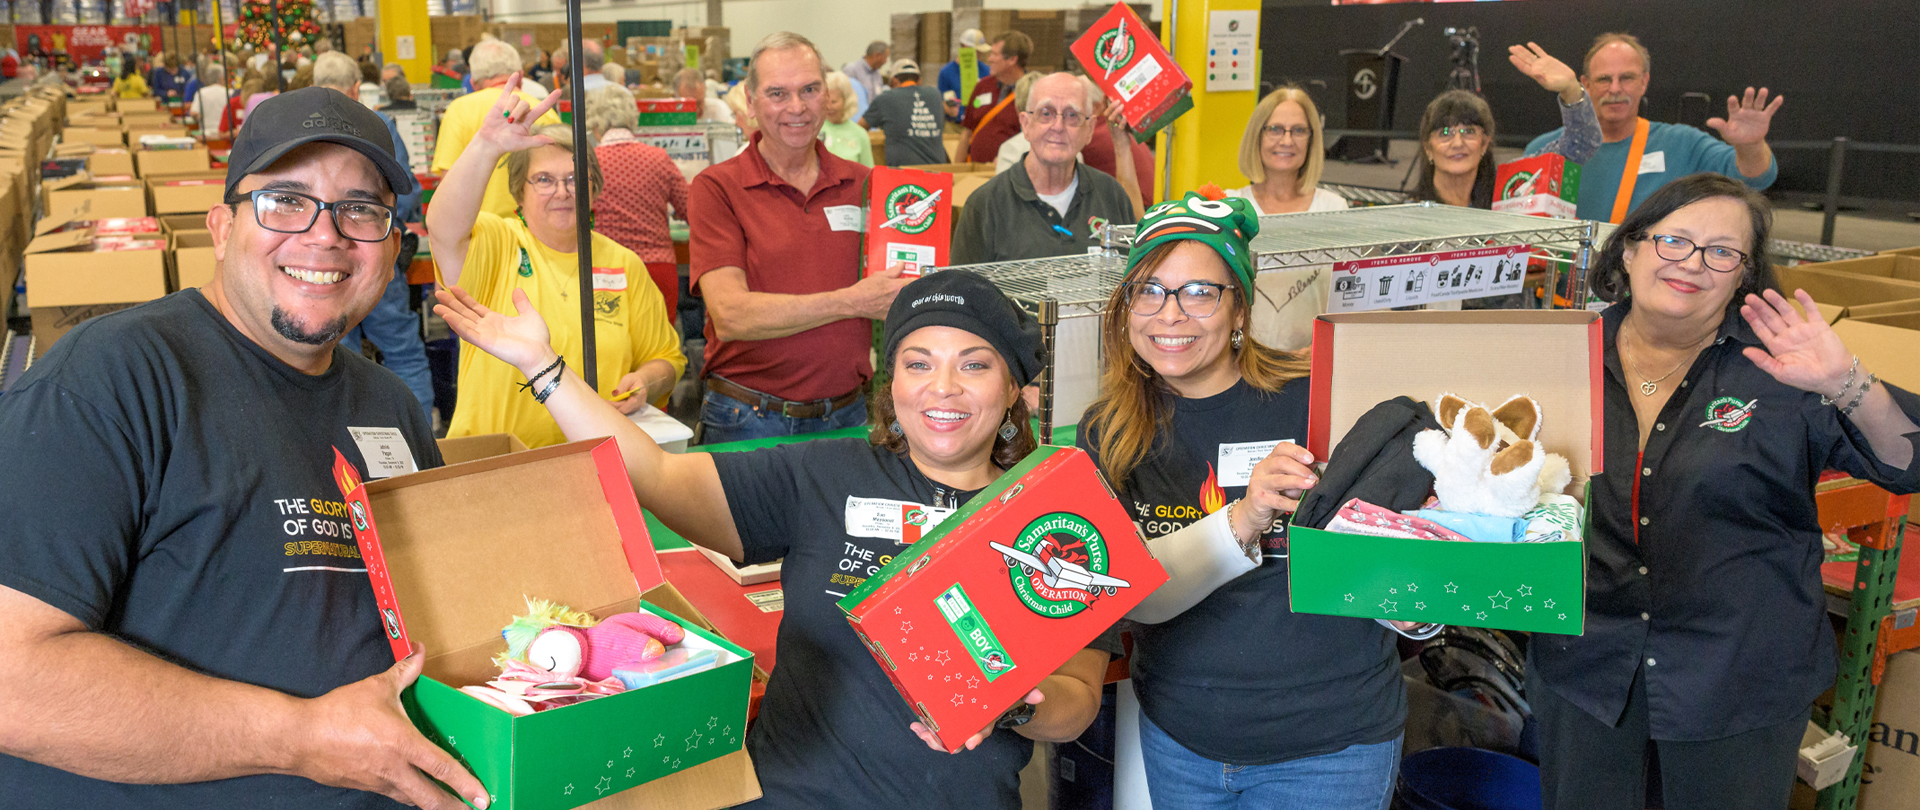 Calvary Night at OCC
Shoebox Distribution Center
Tuesday, November 28
All spots are filled!
